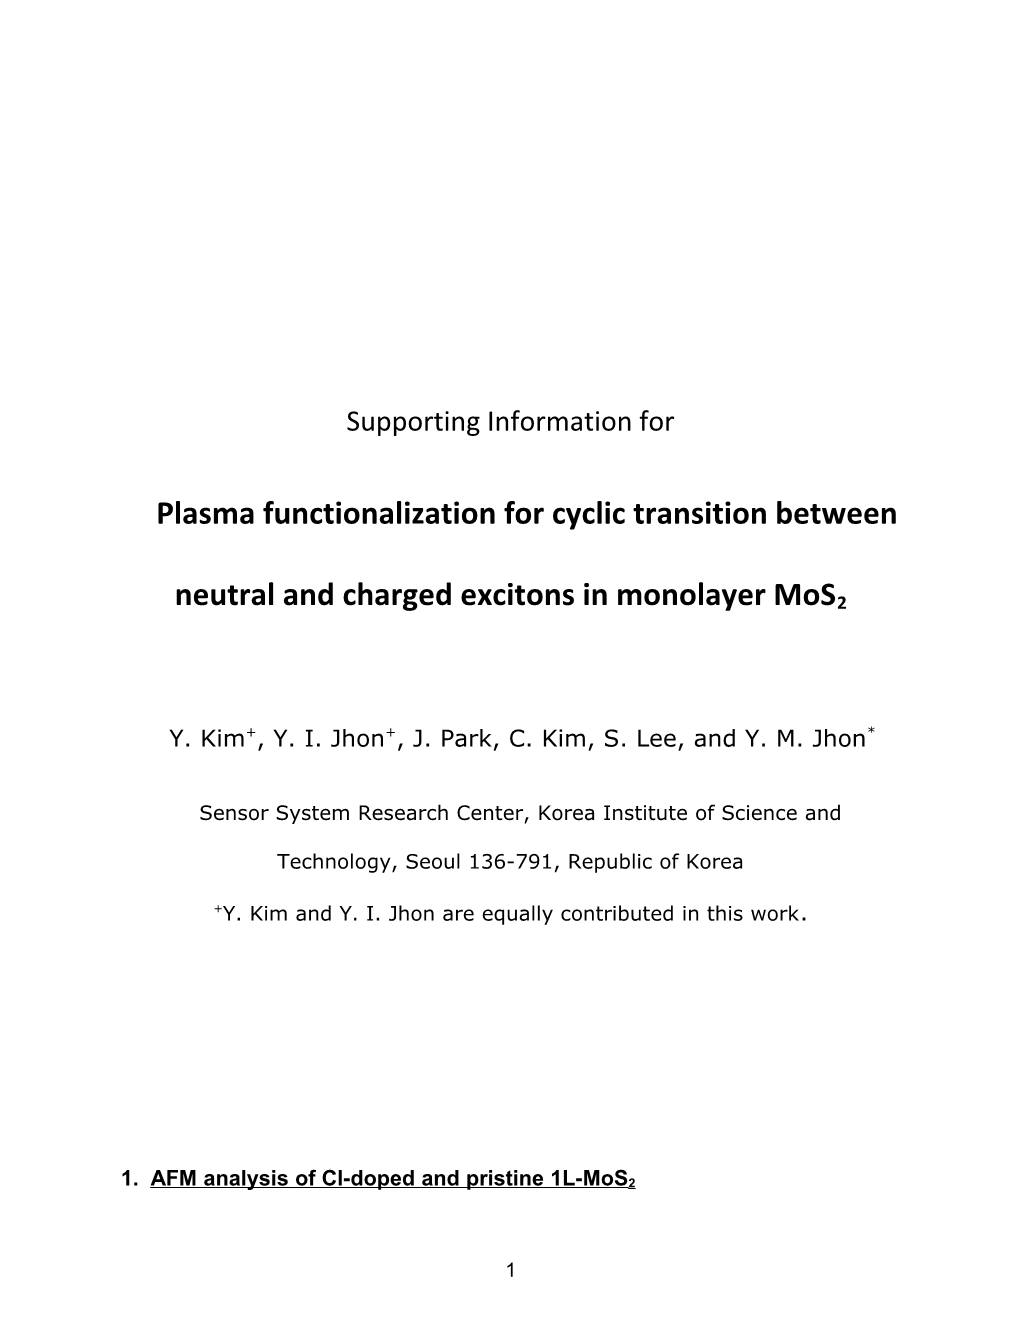 Plasma Functionalization for Cyclic Transition Between Neutral and Charged Excitons In